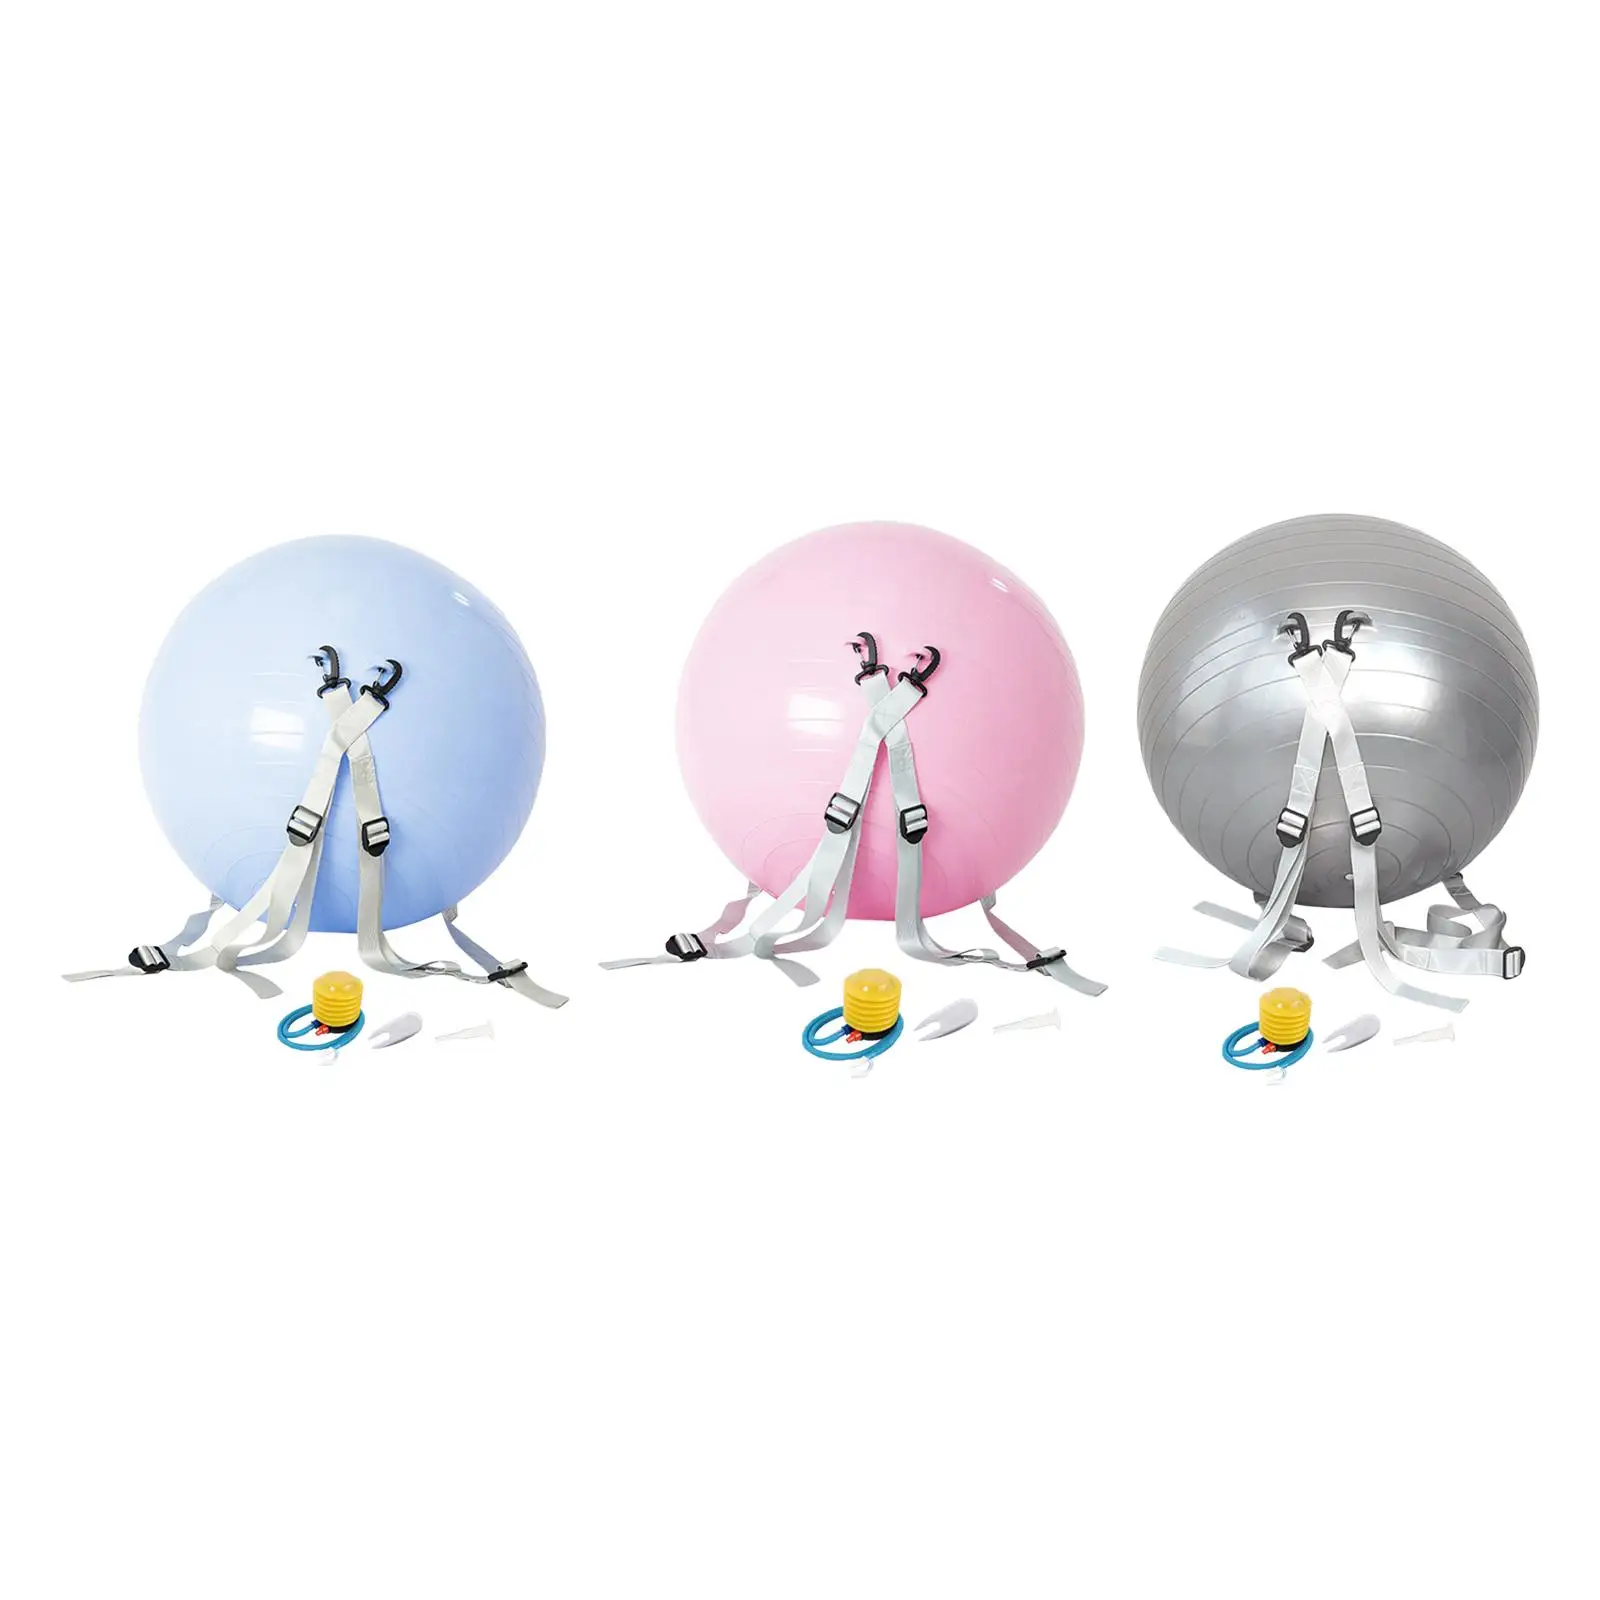 Somersault Auxiliary Ball Fitness Ball Portable Workout Kids Adults Durable Stretch Training Yoga Ball Somersault Assist Ball